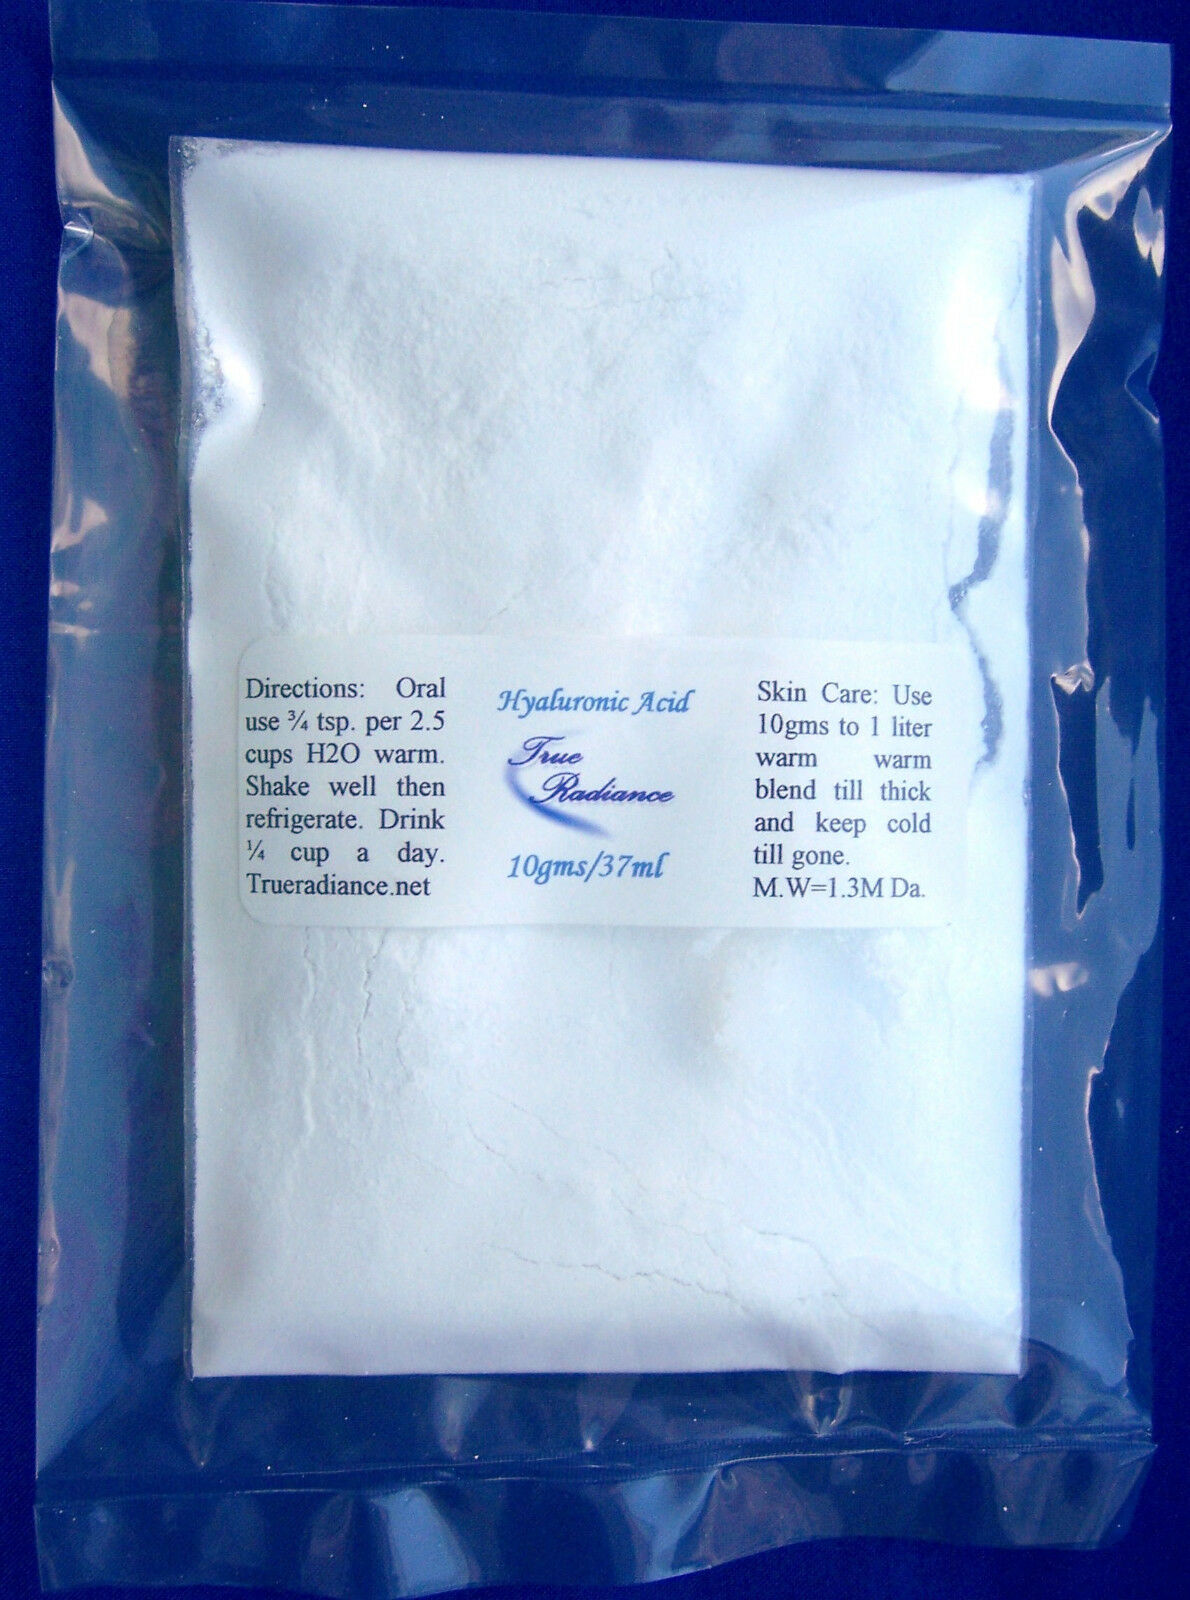 Joint pain use Pure HYALURONIC ACID powder 10gm=100 day oral True Radiance Skin - $24.31